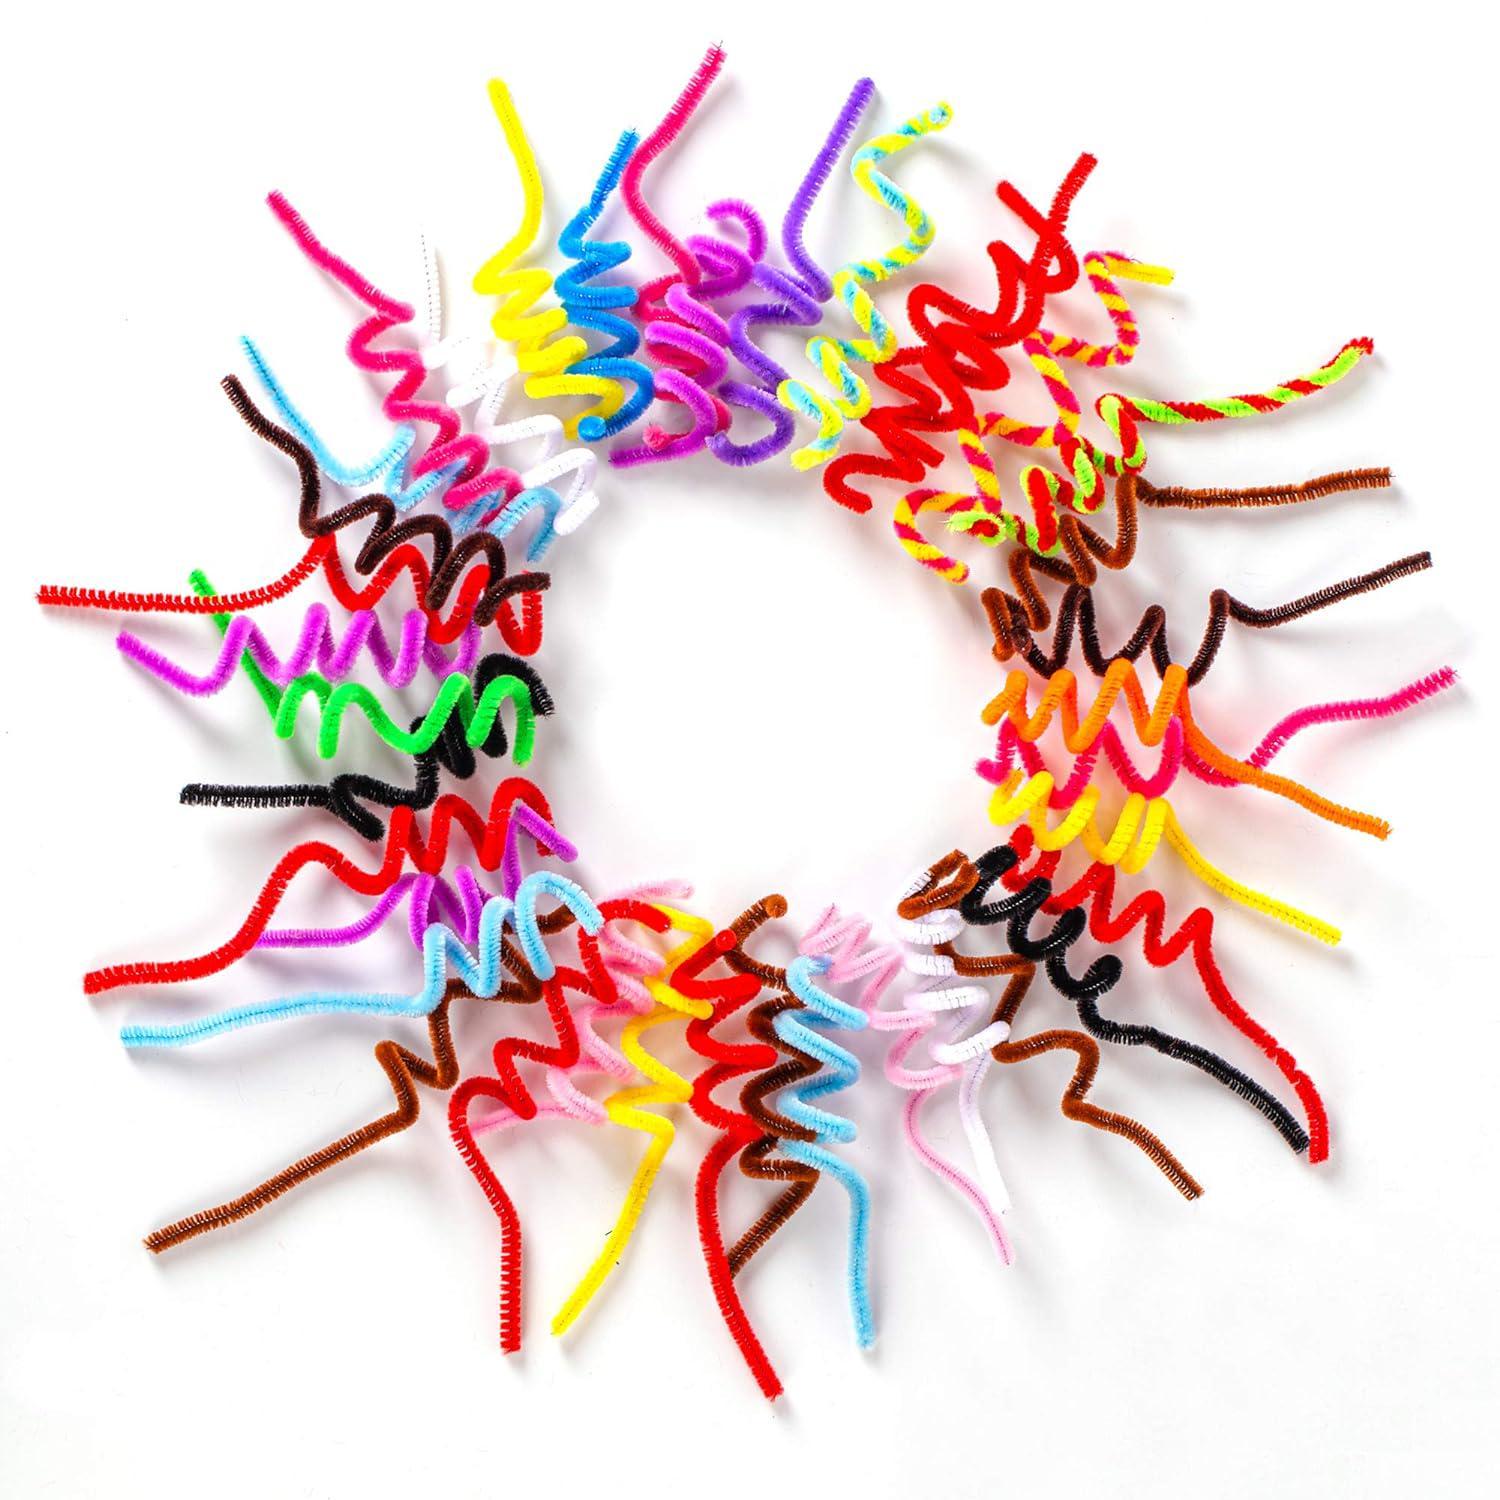 Craft County Bulk Packs Chenille Stems | 300-350 Pieces | Bendy Pipe Cleaner Craft Kits, Blue